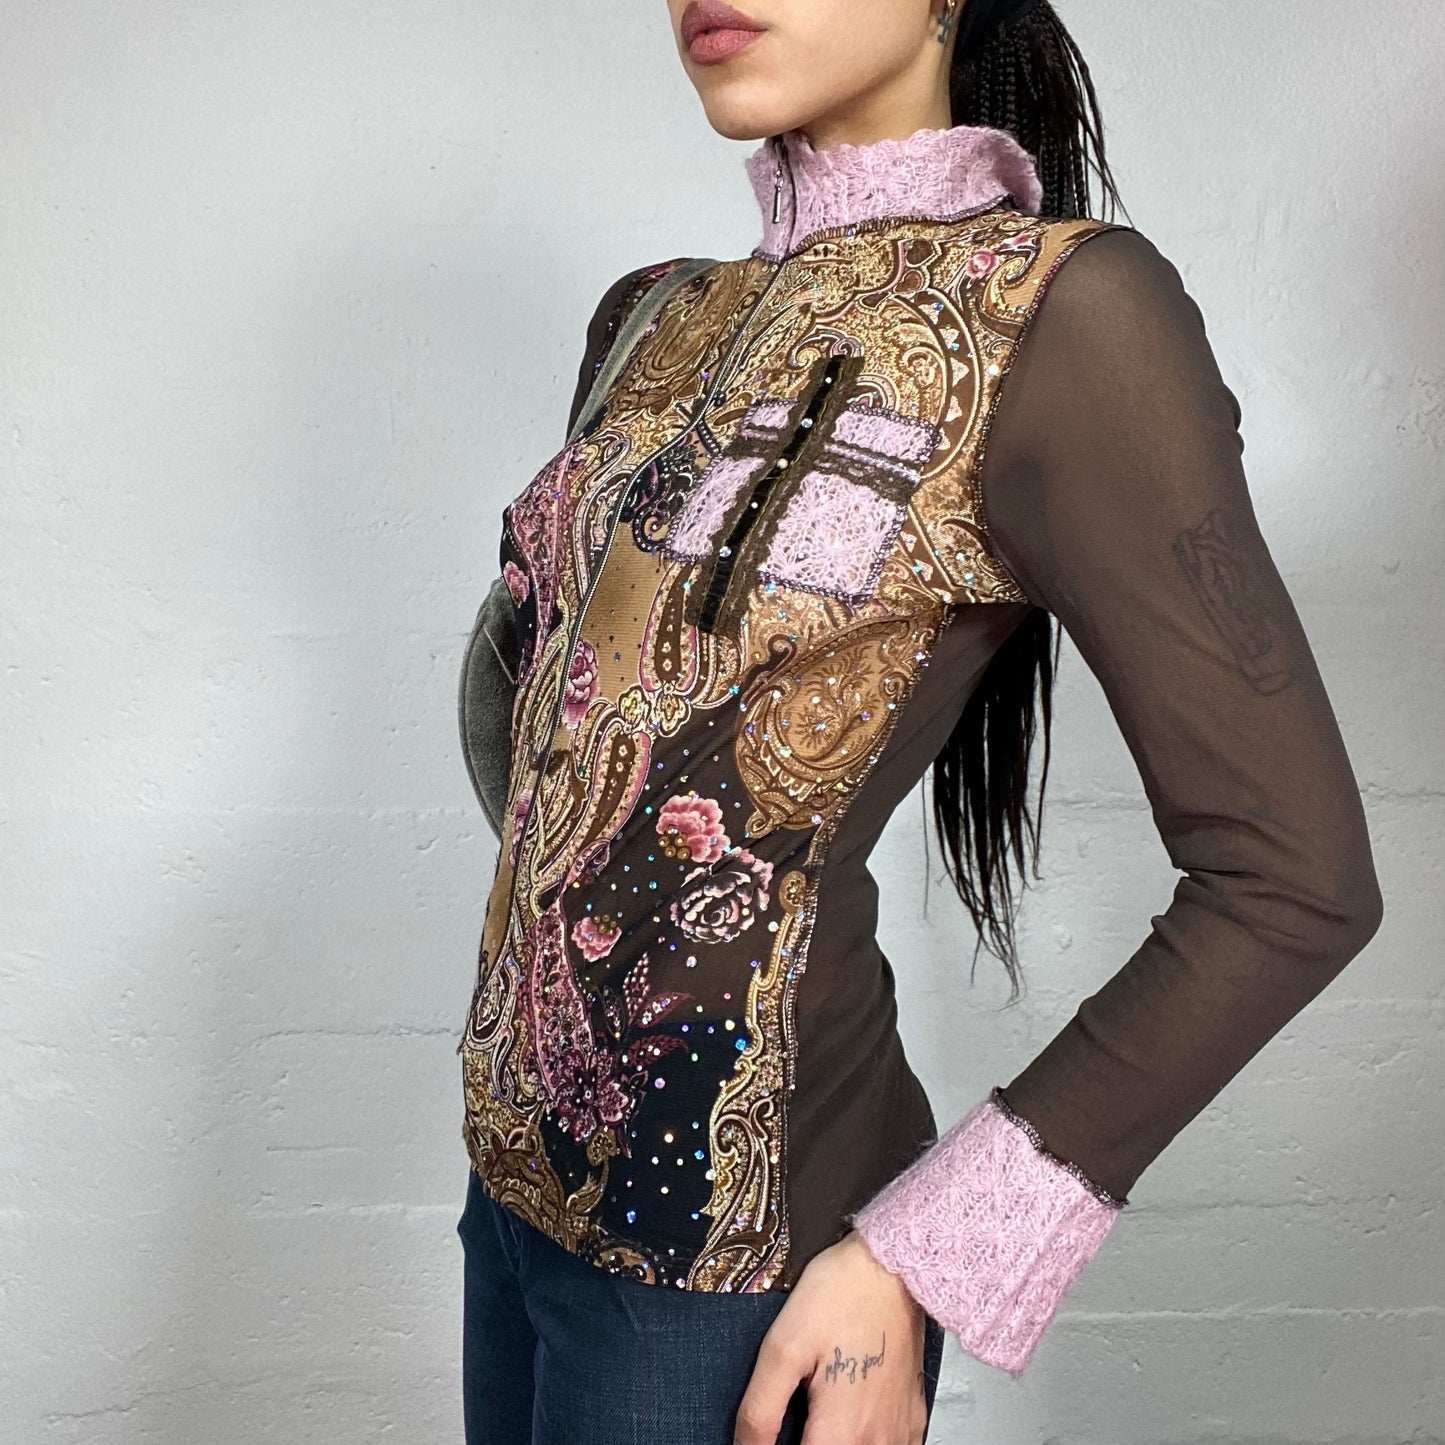 Vintage 2000's Hippie Pink and Brown Zip Up Sweater with Knitted Patches and Floral Print with Strass Detail (S)